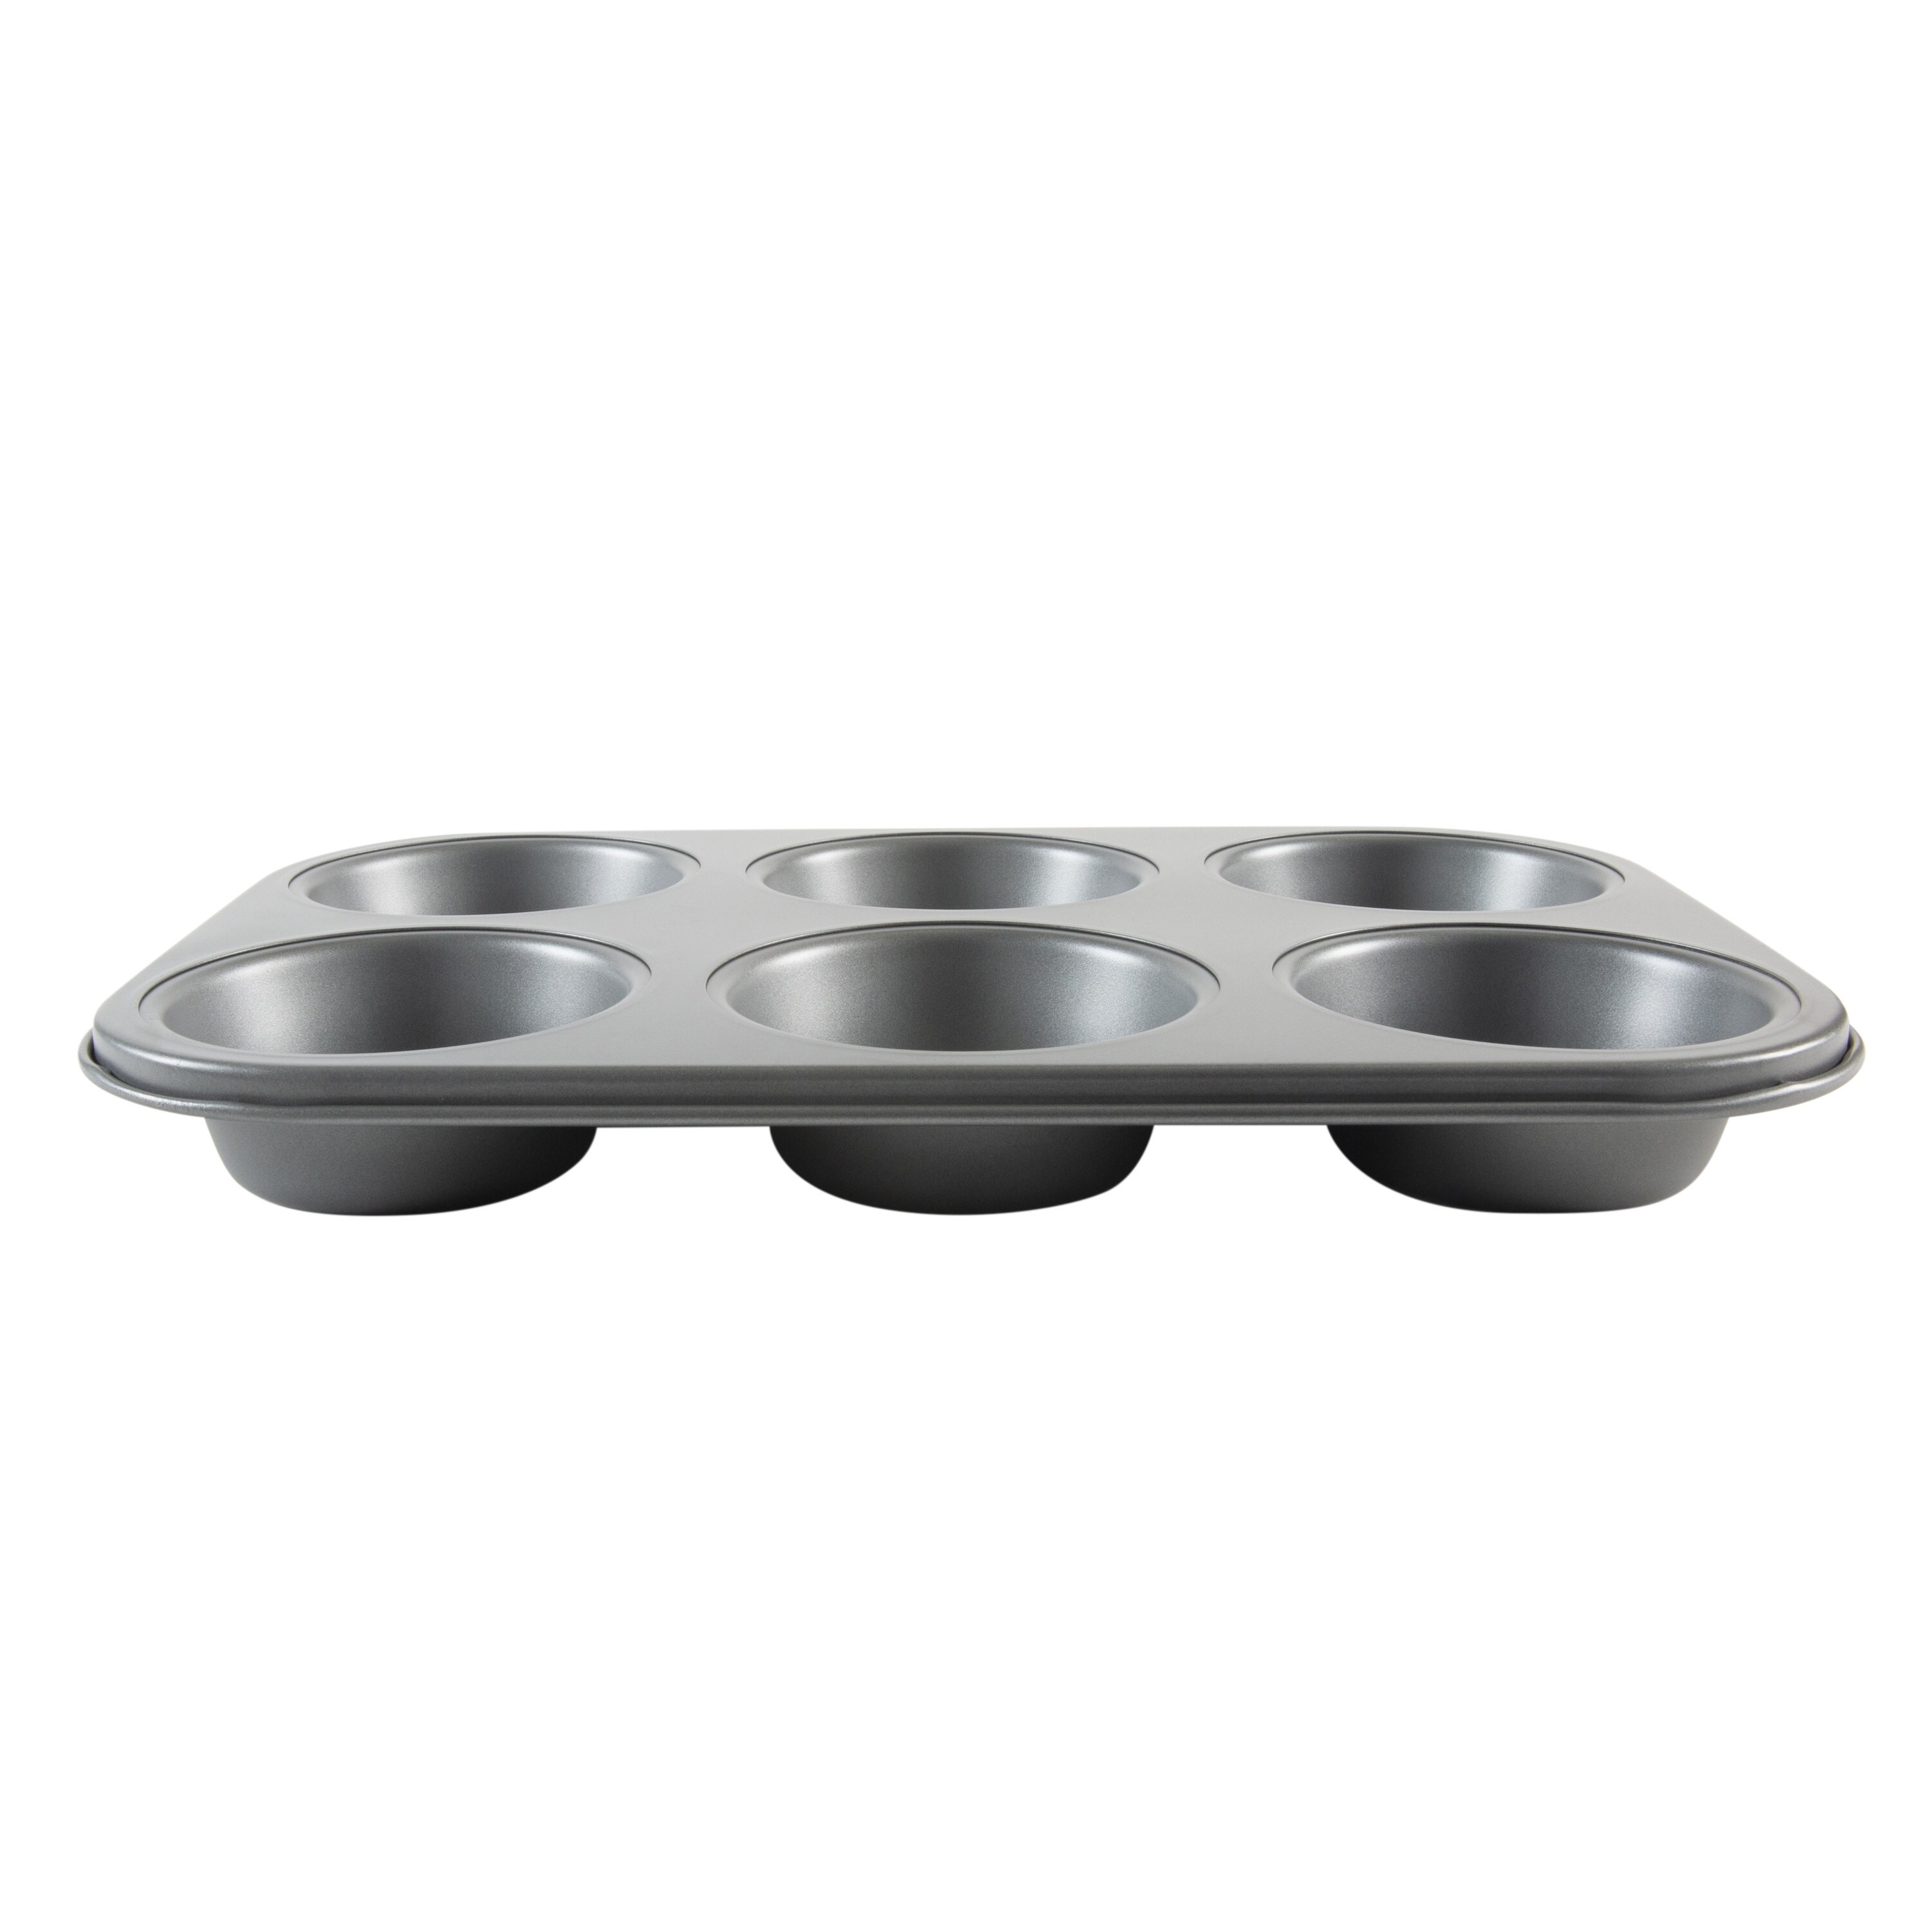 Kitchen Details 6 Cup Texas Muffin Pan - Bed Bath & Beyond - 36178045